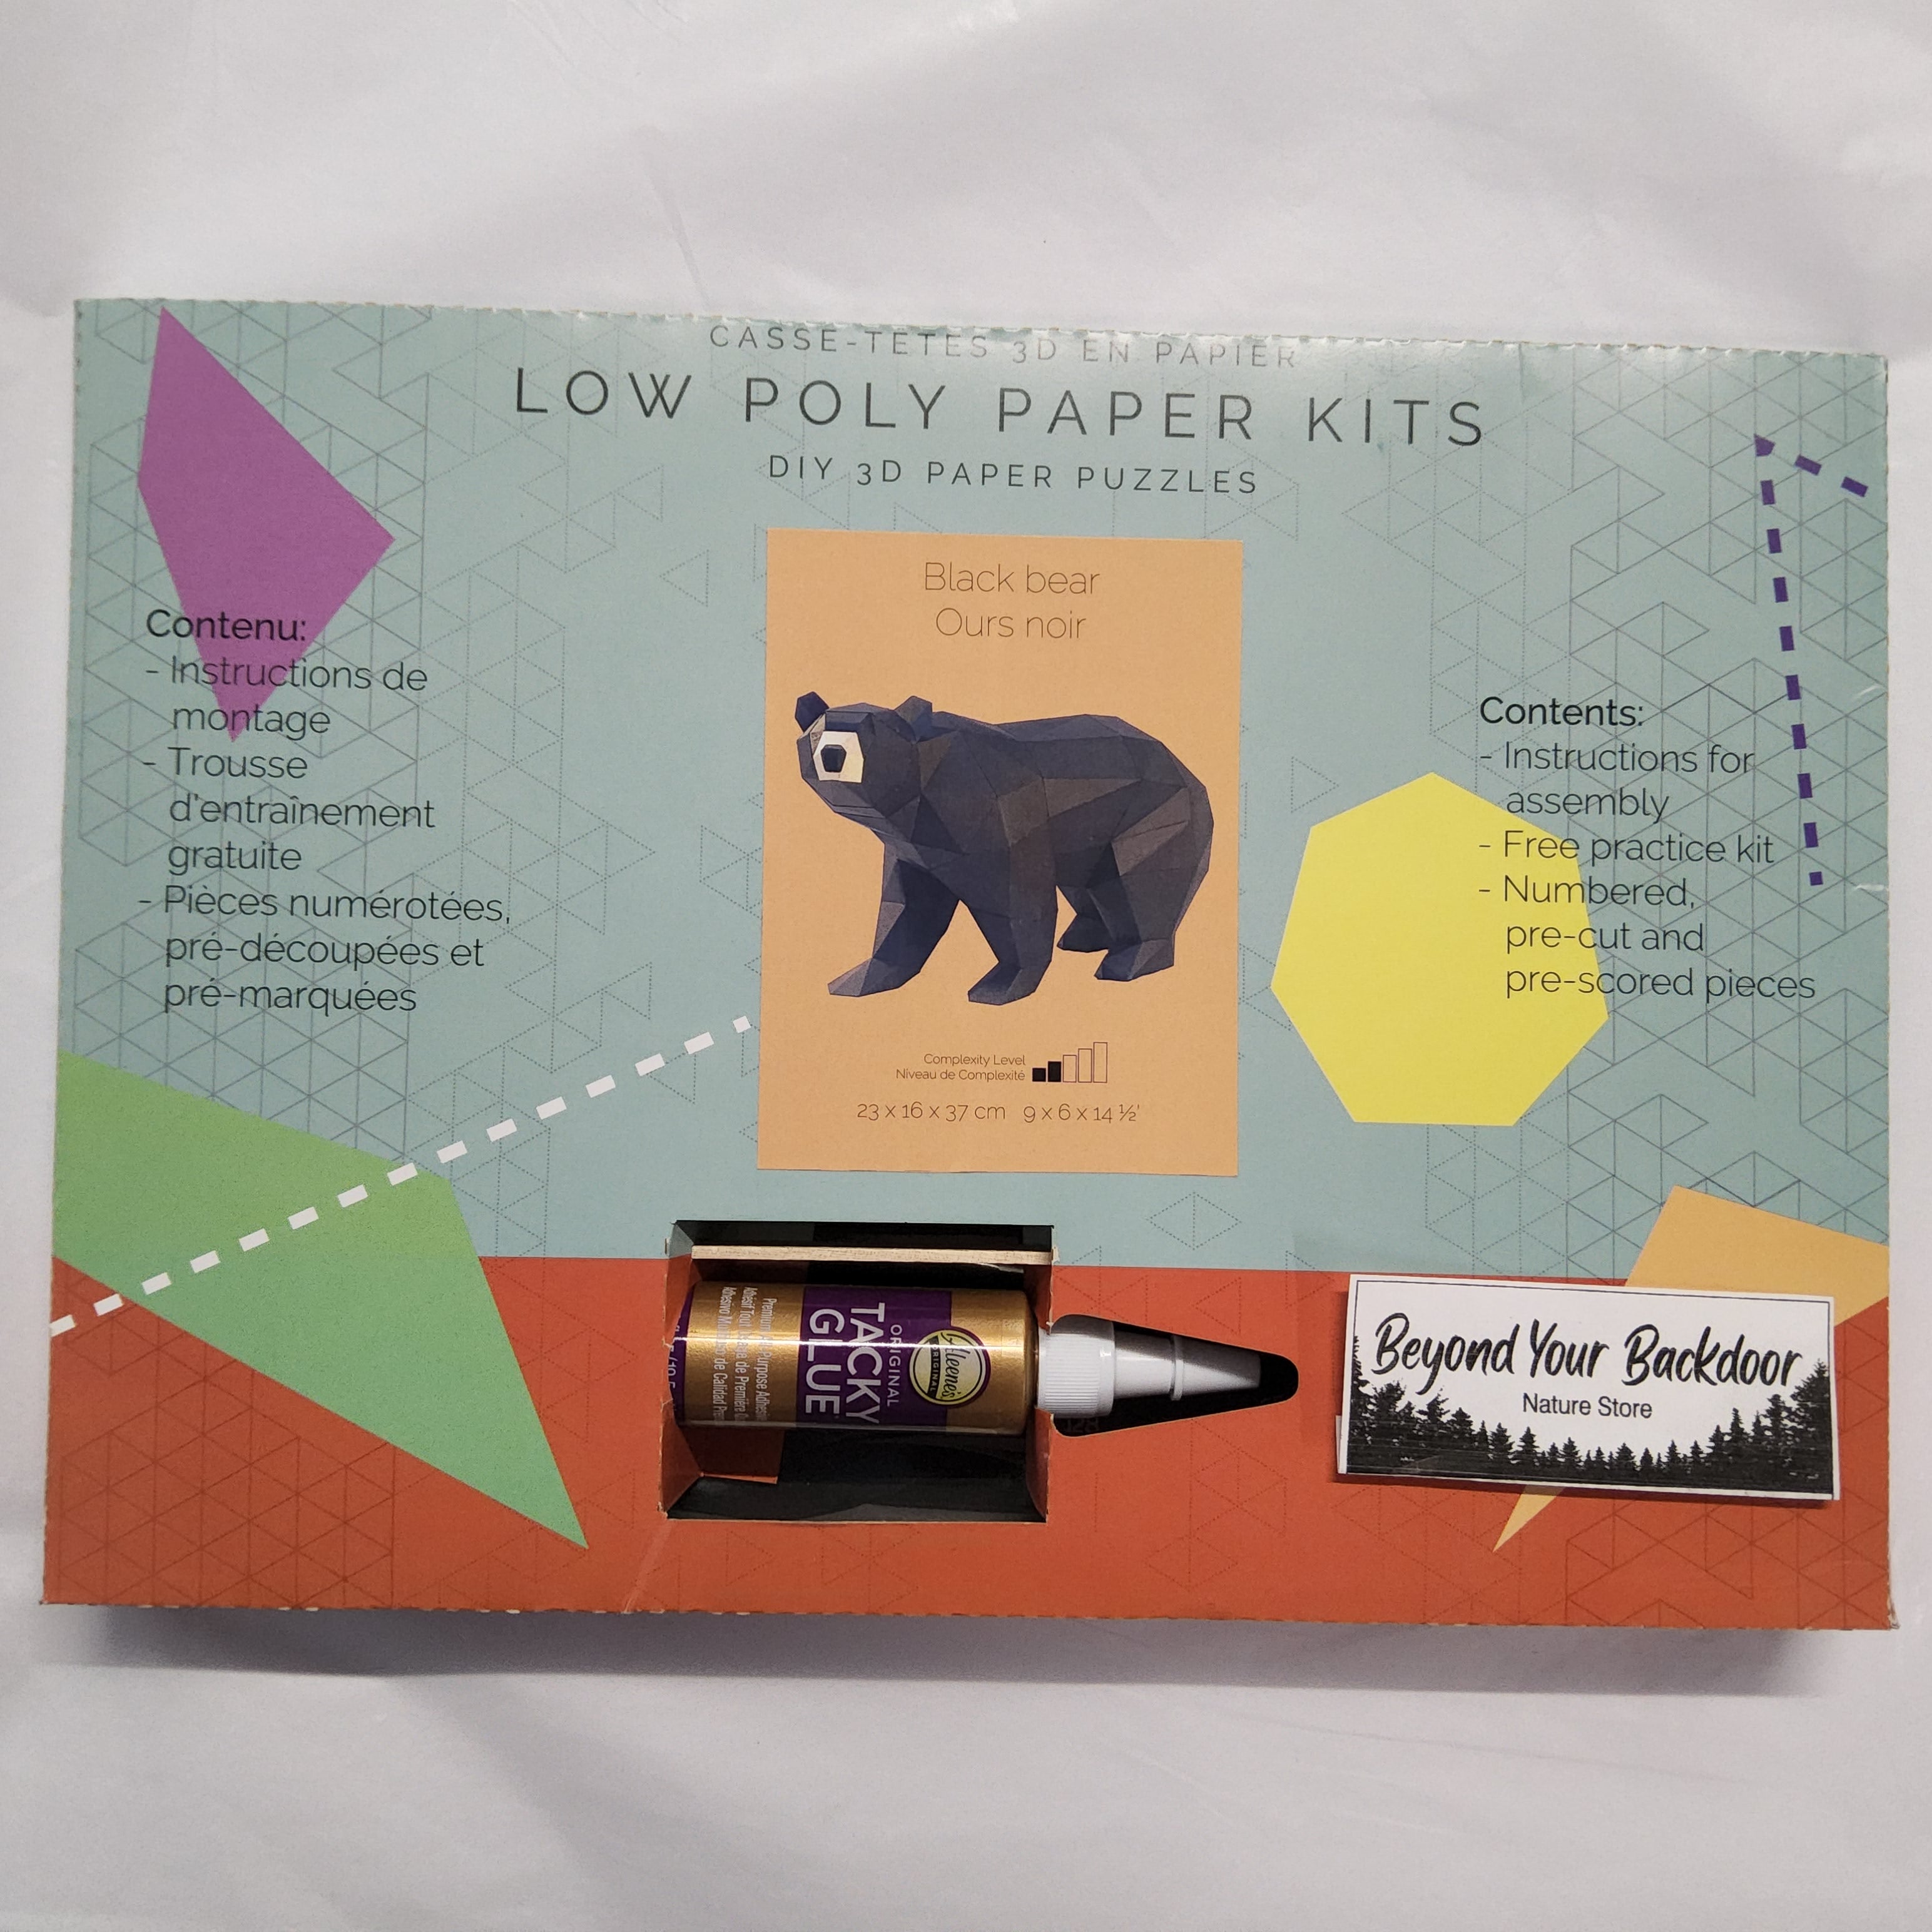 Low Poly Paper Kits - with glue and bamboo stick included - Complexity 2/5 - Assorted Designs